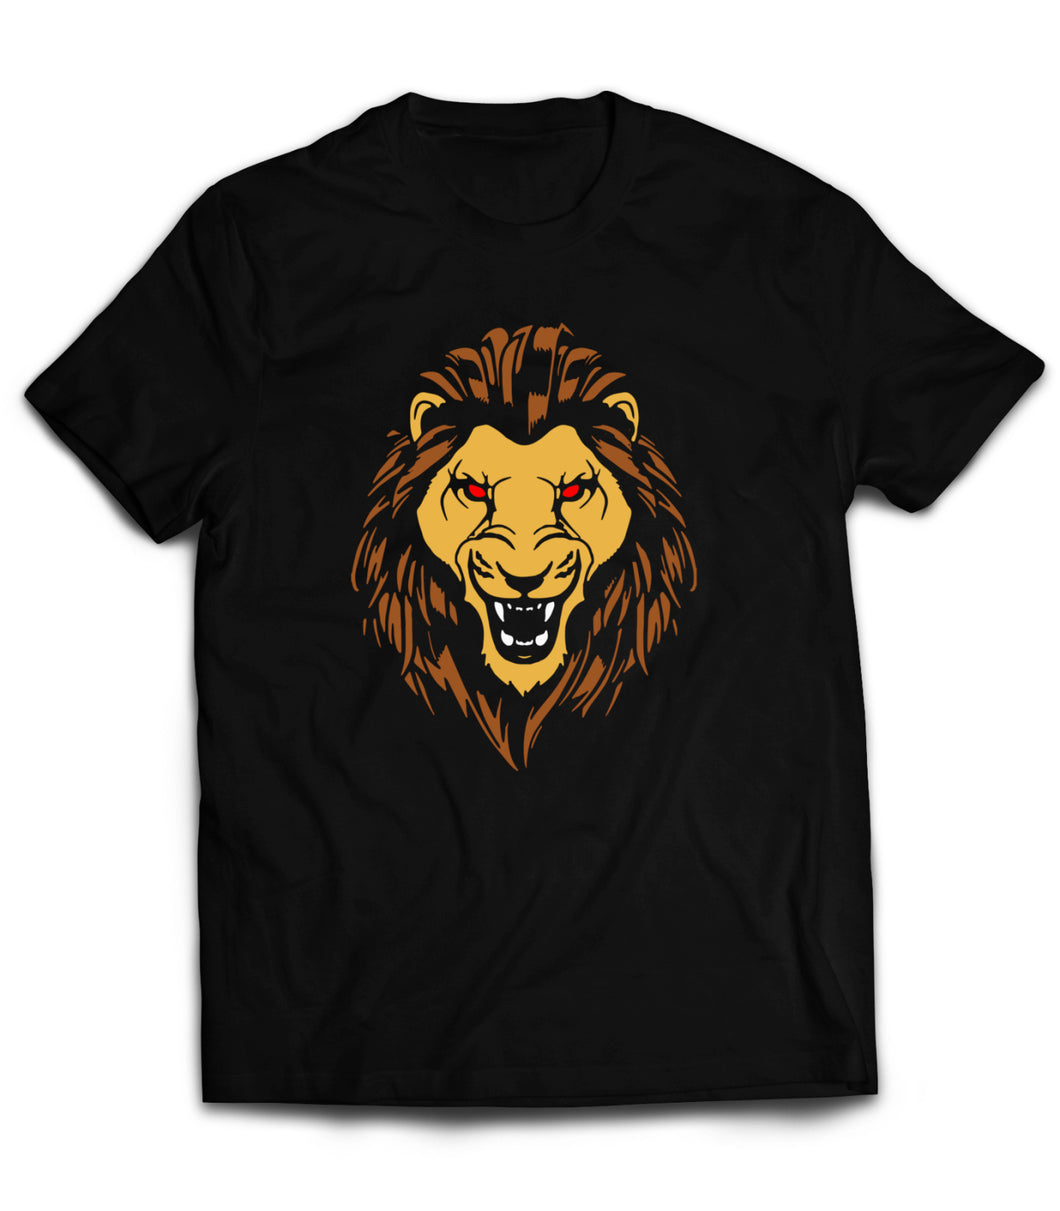 Taliban King of Lion Summer Men's T Shirt Afghanistan Flag With Lion T-Shirt  Casual Short Sleeve Funny Gift Male Tops Tee Shirts